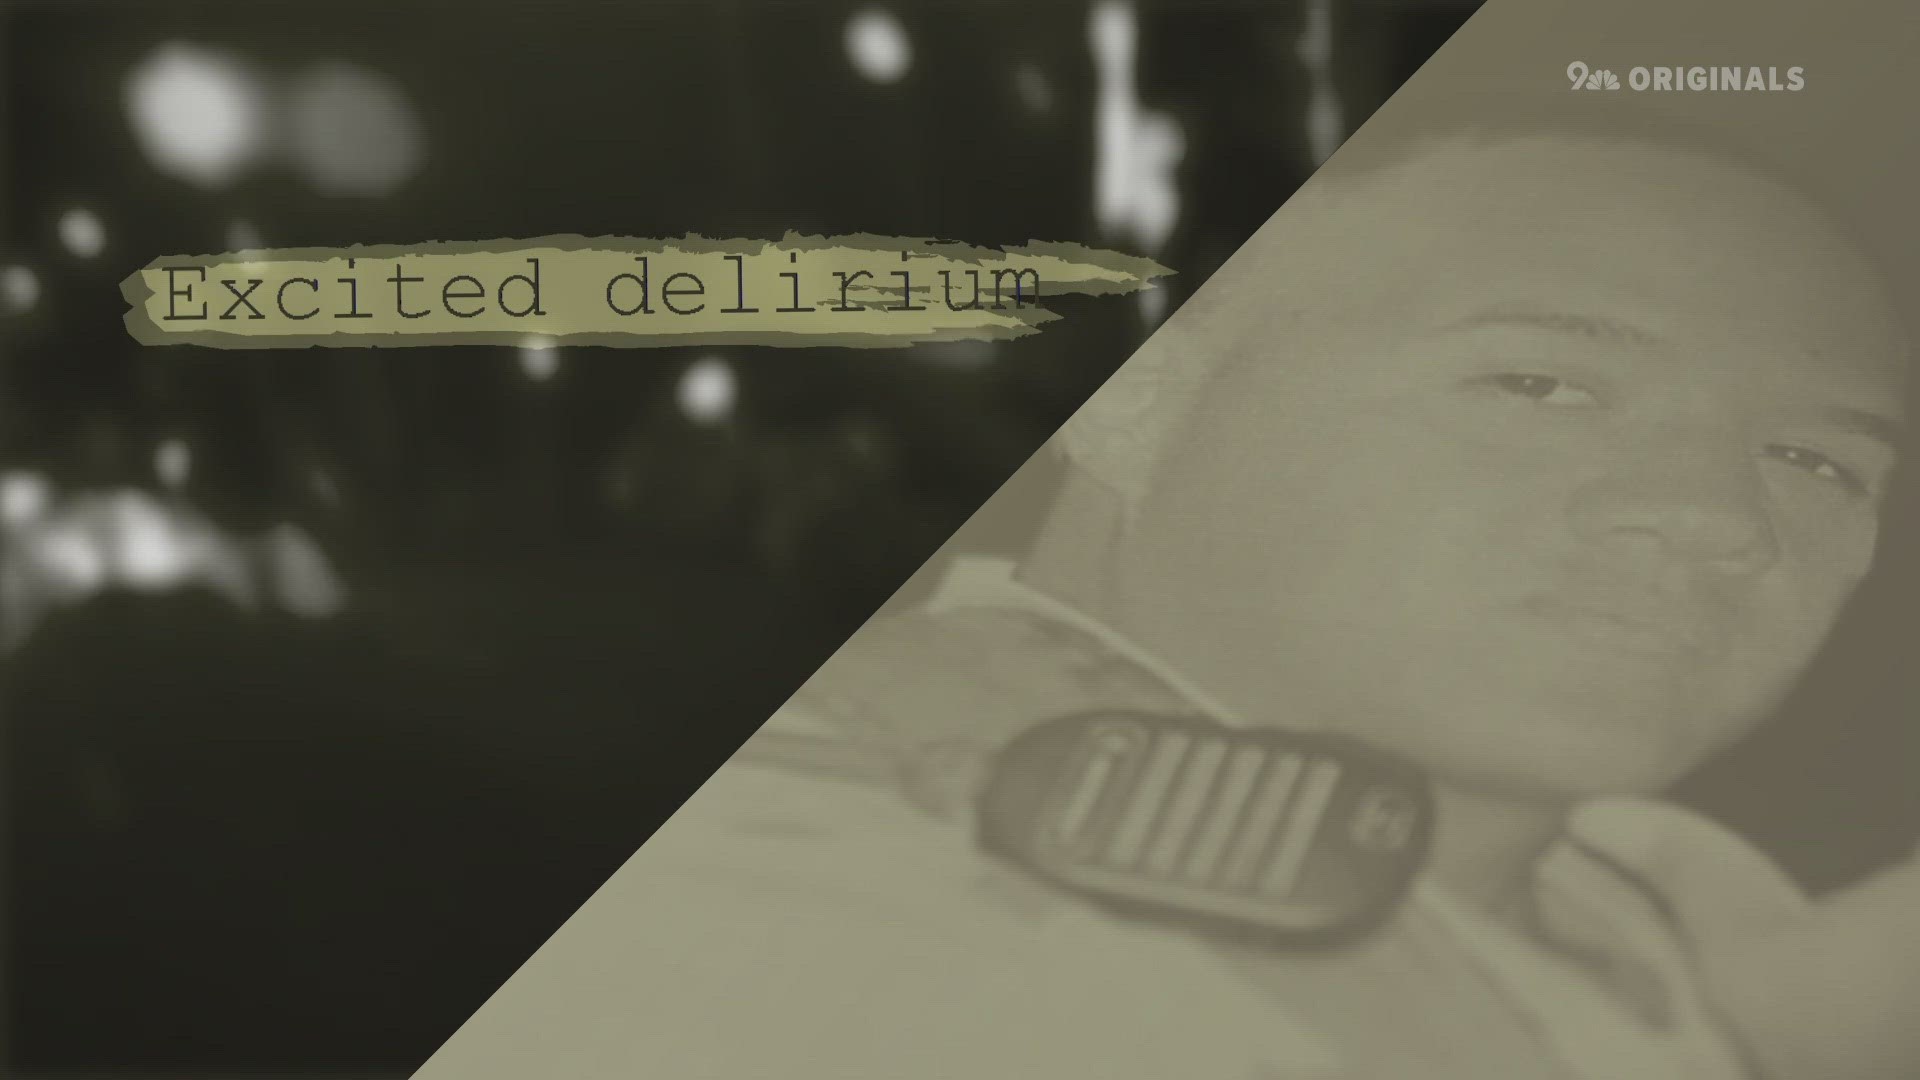 "Excited delirium" is a term that's been used for more than a decade to excuse hundreds of "in-custody deaths" across the U.S.